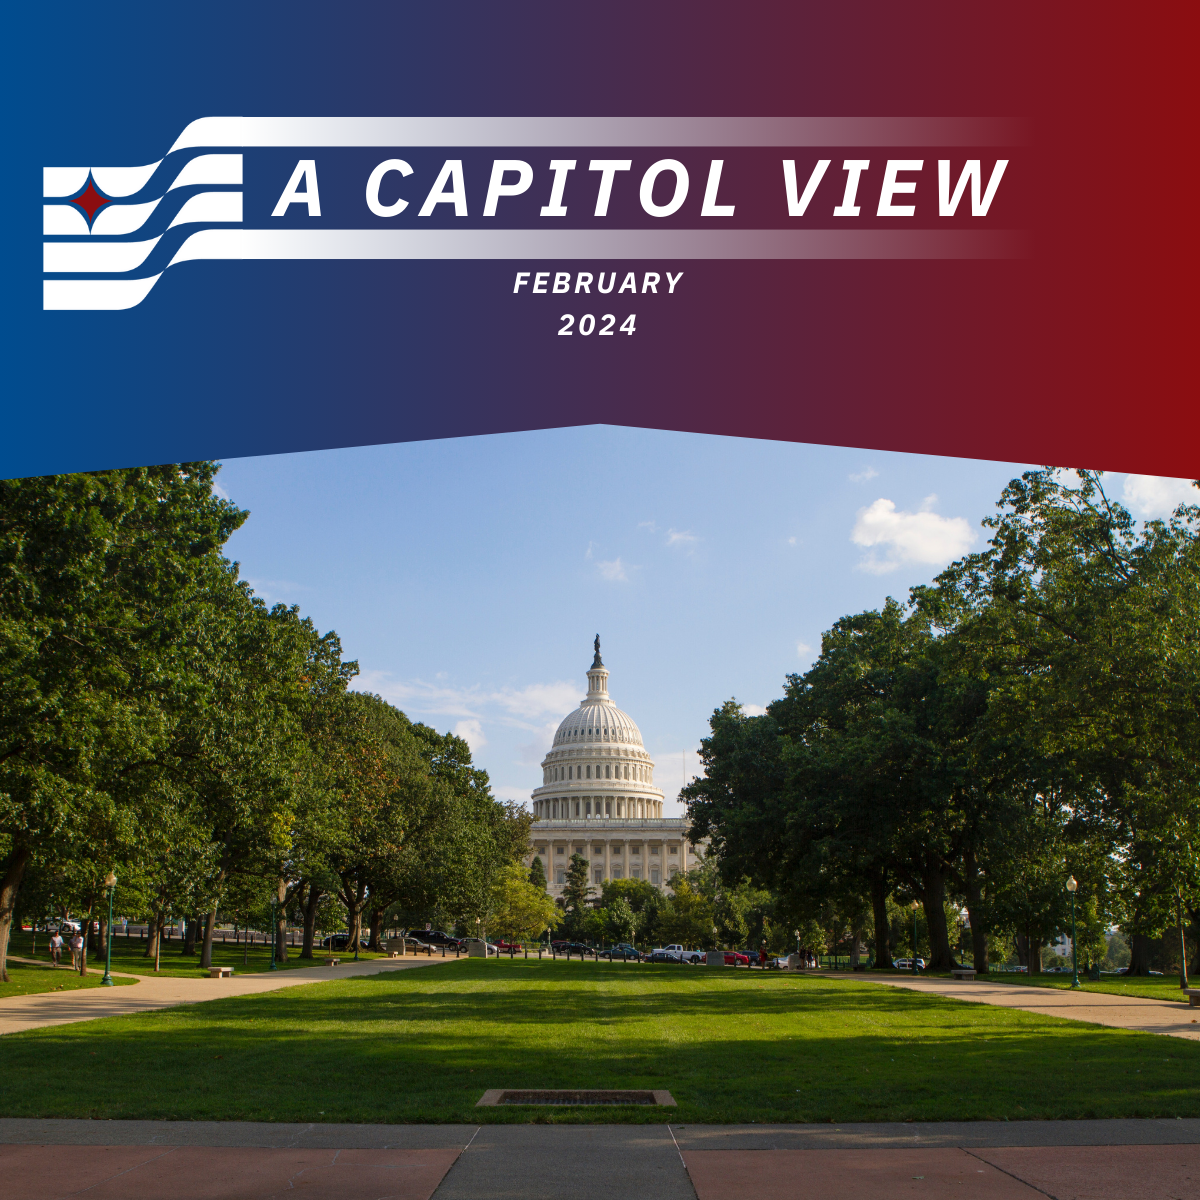 Welcome to a Capitol View: February 2024